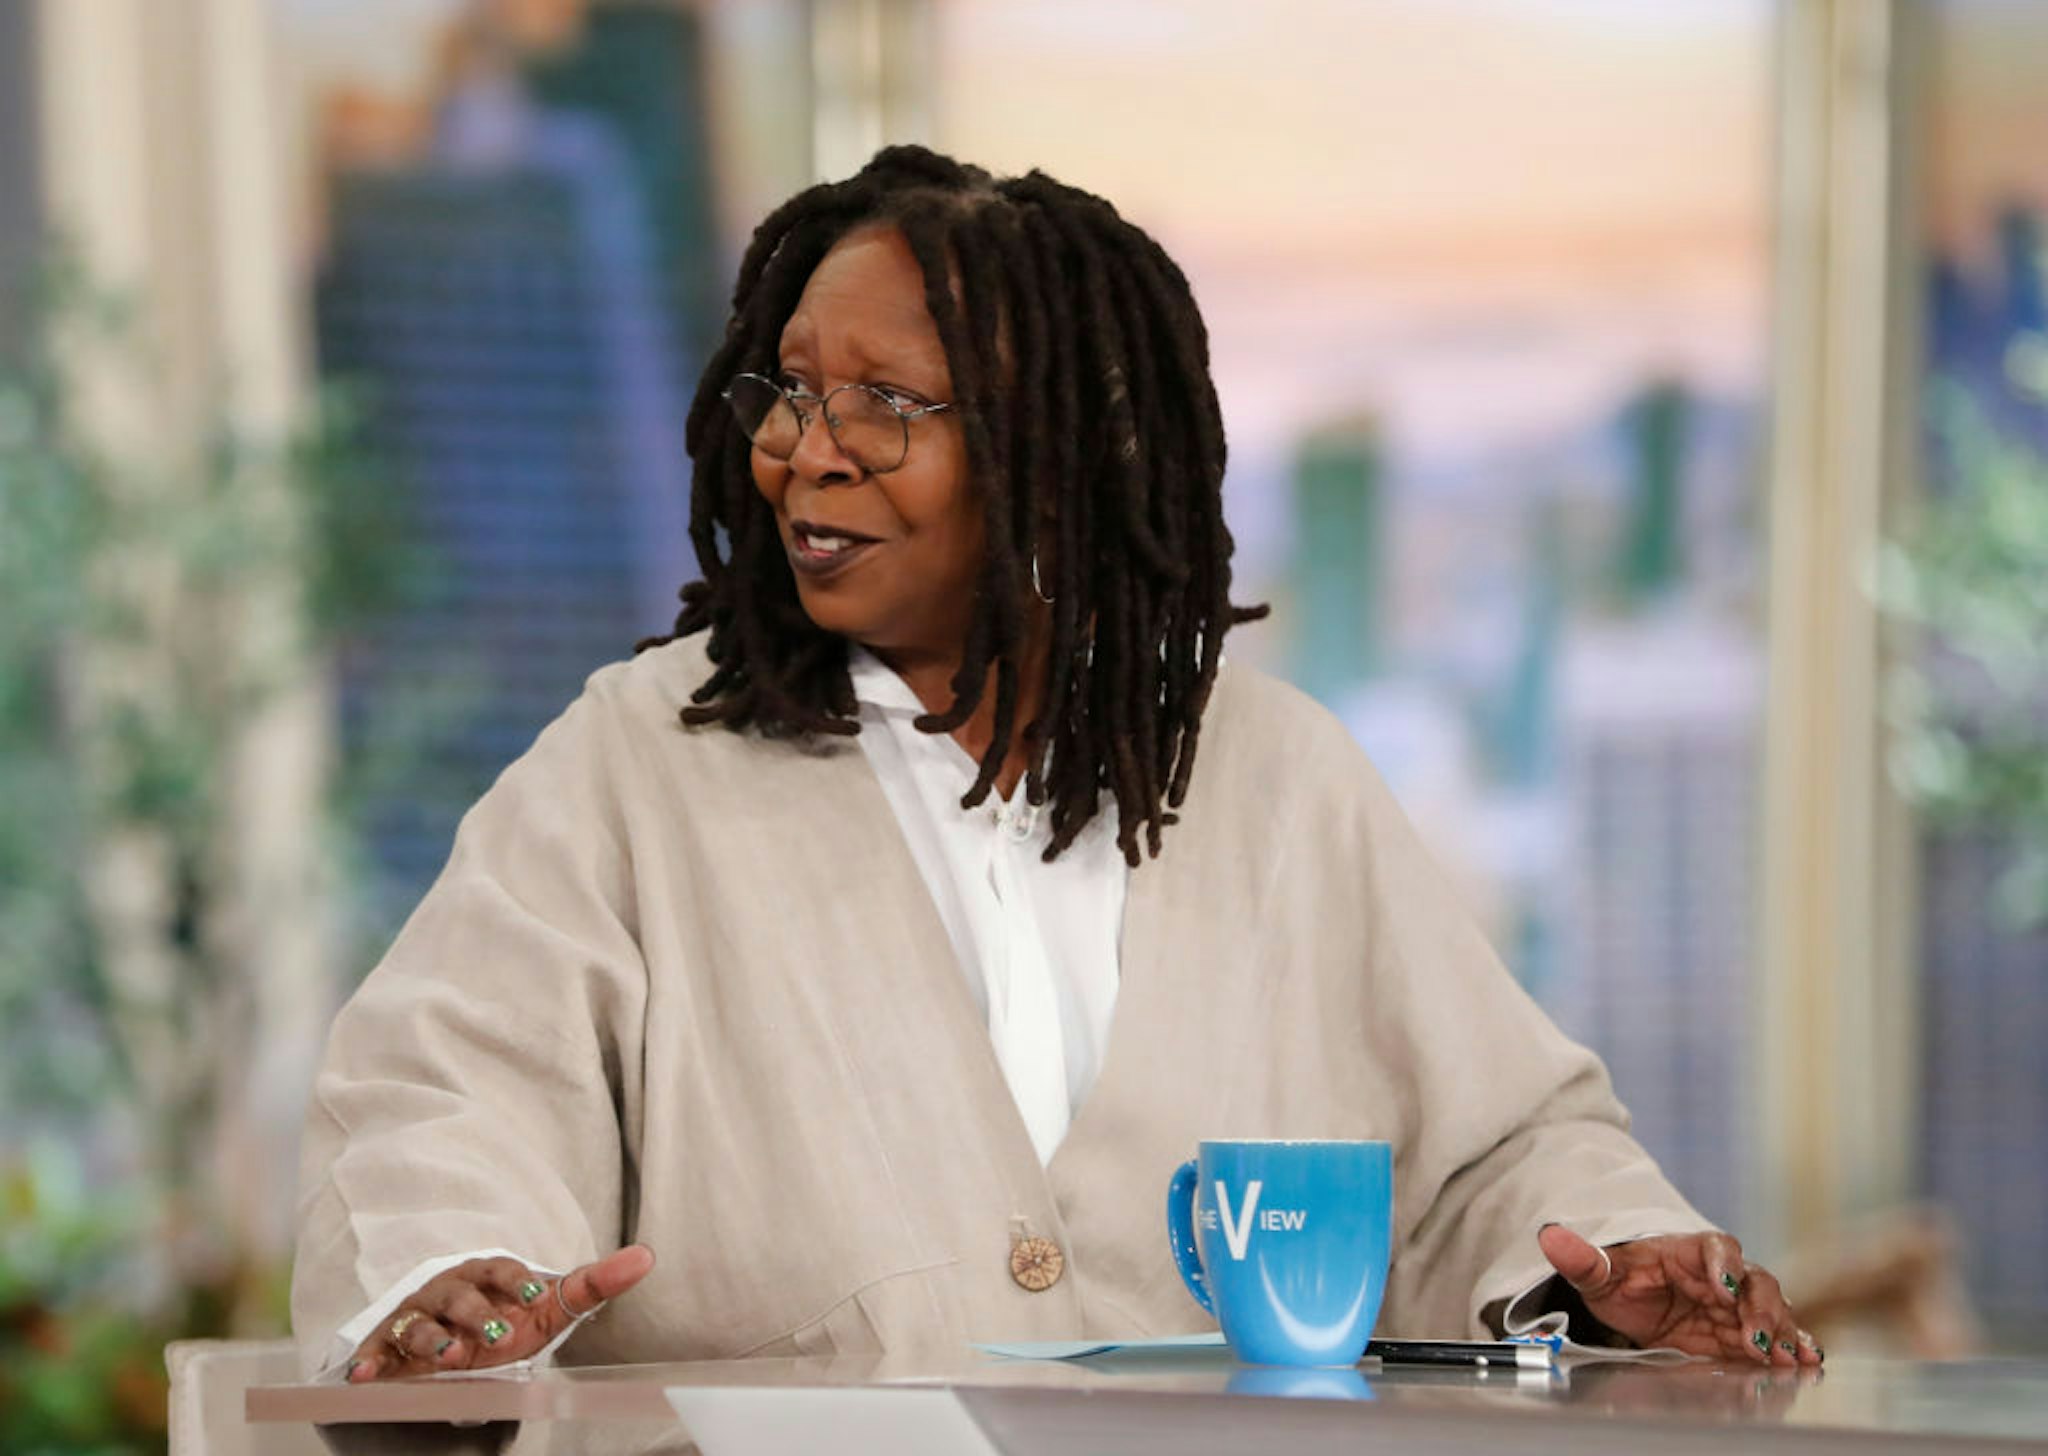 THE VIEW- 3/6/23 - Brendan Fraser is a guest on The View on Monday, March 6, 2023. The View airs Monday-Friday, 11am-12 noon, ET on ABC. (Photo by Lou Rocco/ABC via Getty Images) WHOOPI GOLDBERG